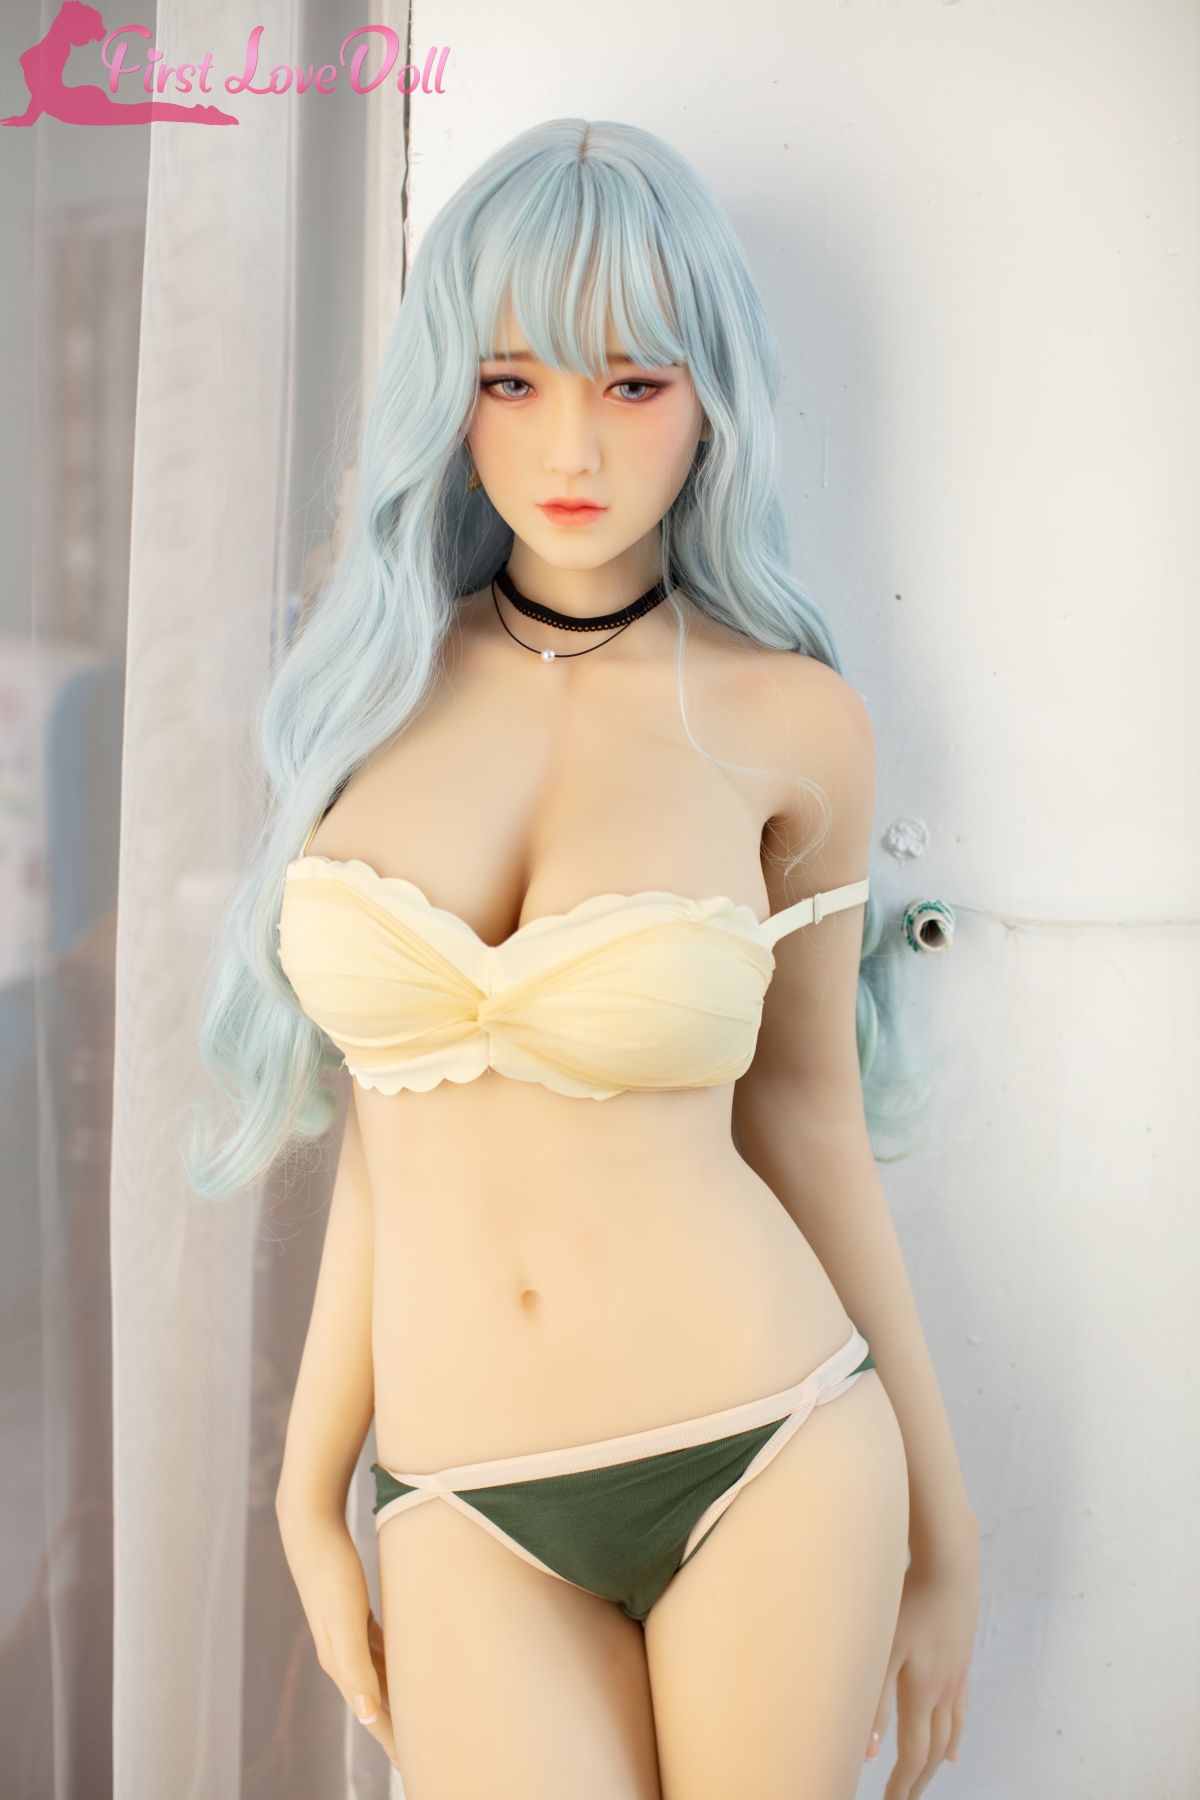 JX Doll | Sora- 5ft 7/170cm Japanese Style Pretty Realistic Full TPE Sex Doll-First Love Doll